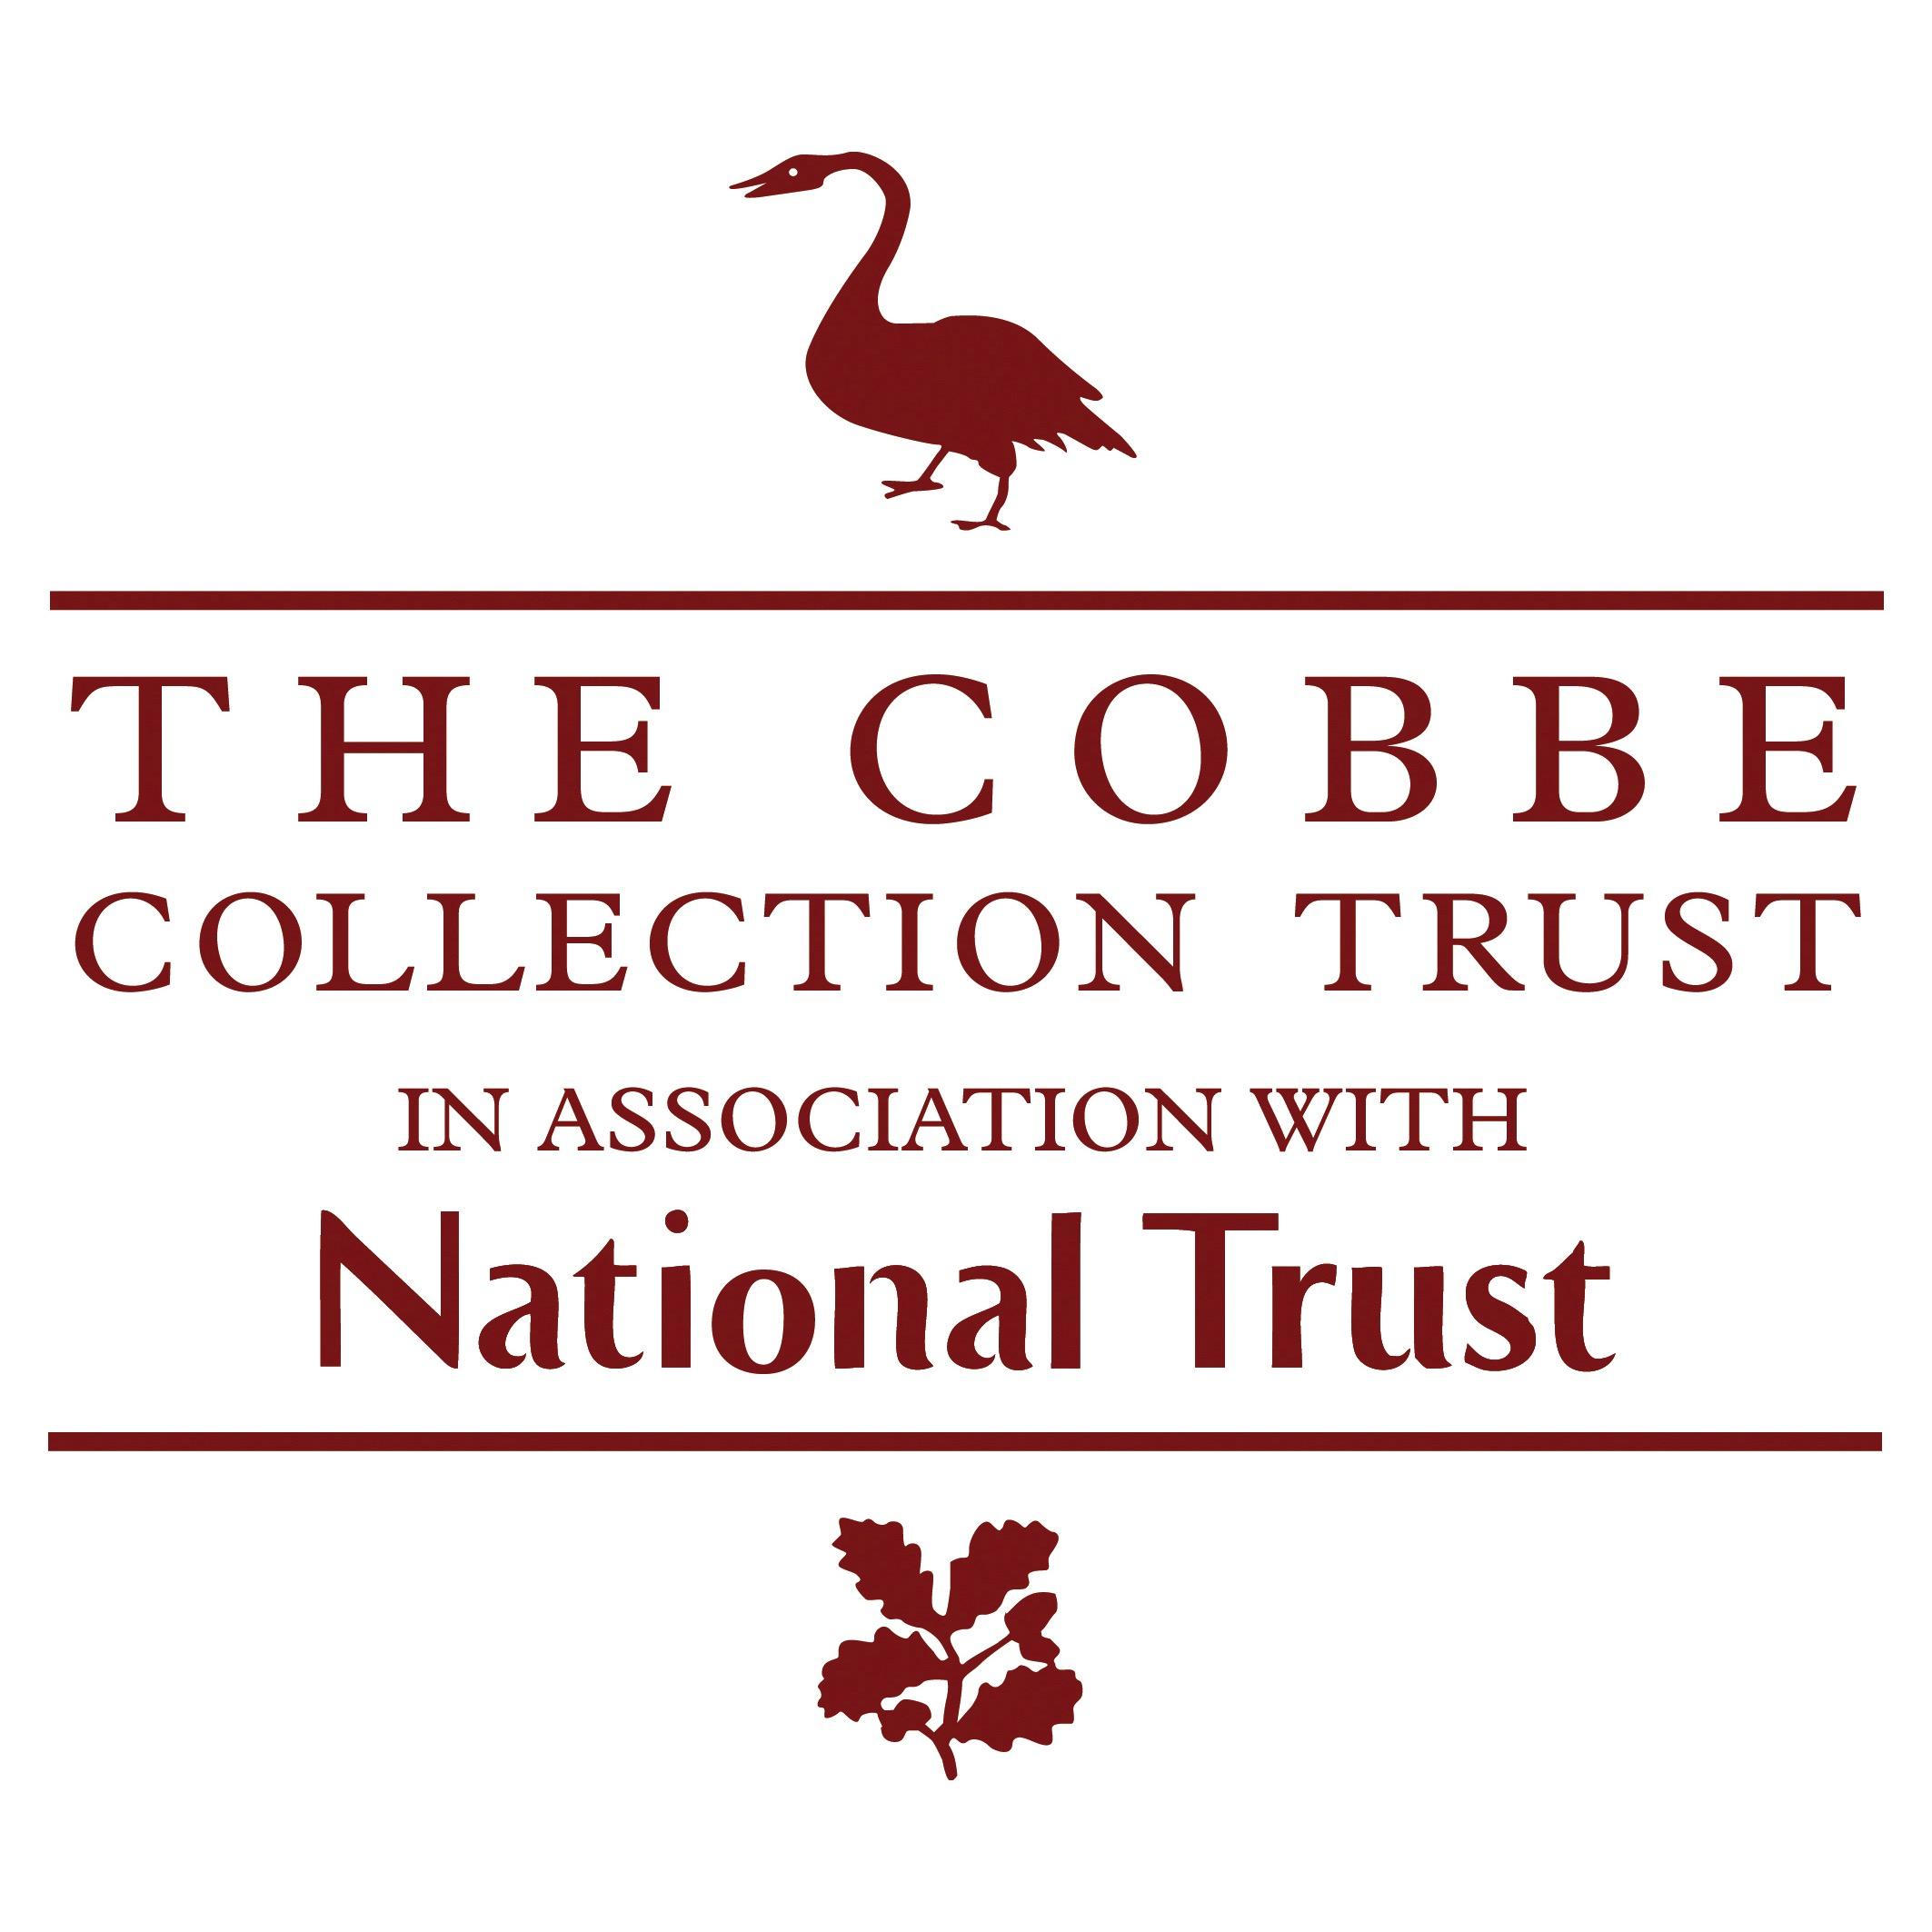 The Cobbe Collection of historic keyboard instruments includes the largest group of instruments
owned or played by famous composers. Based at Hatchlands